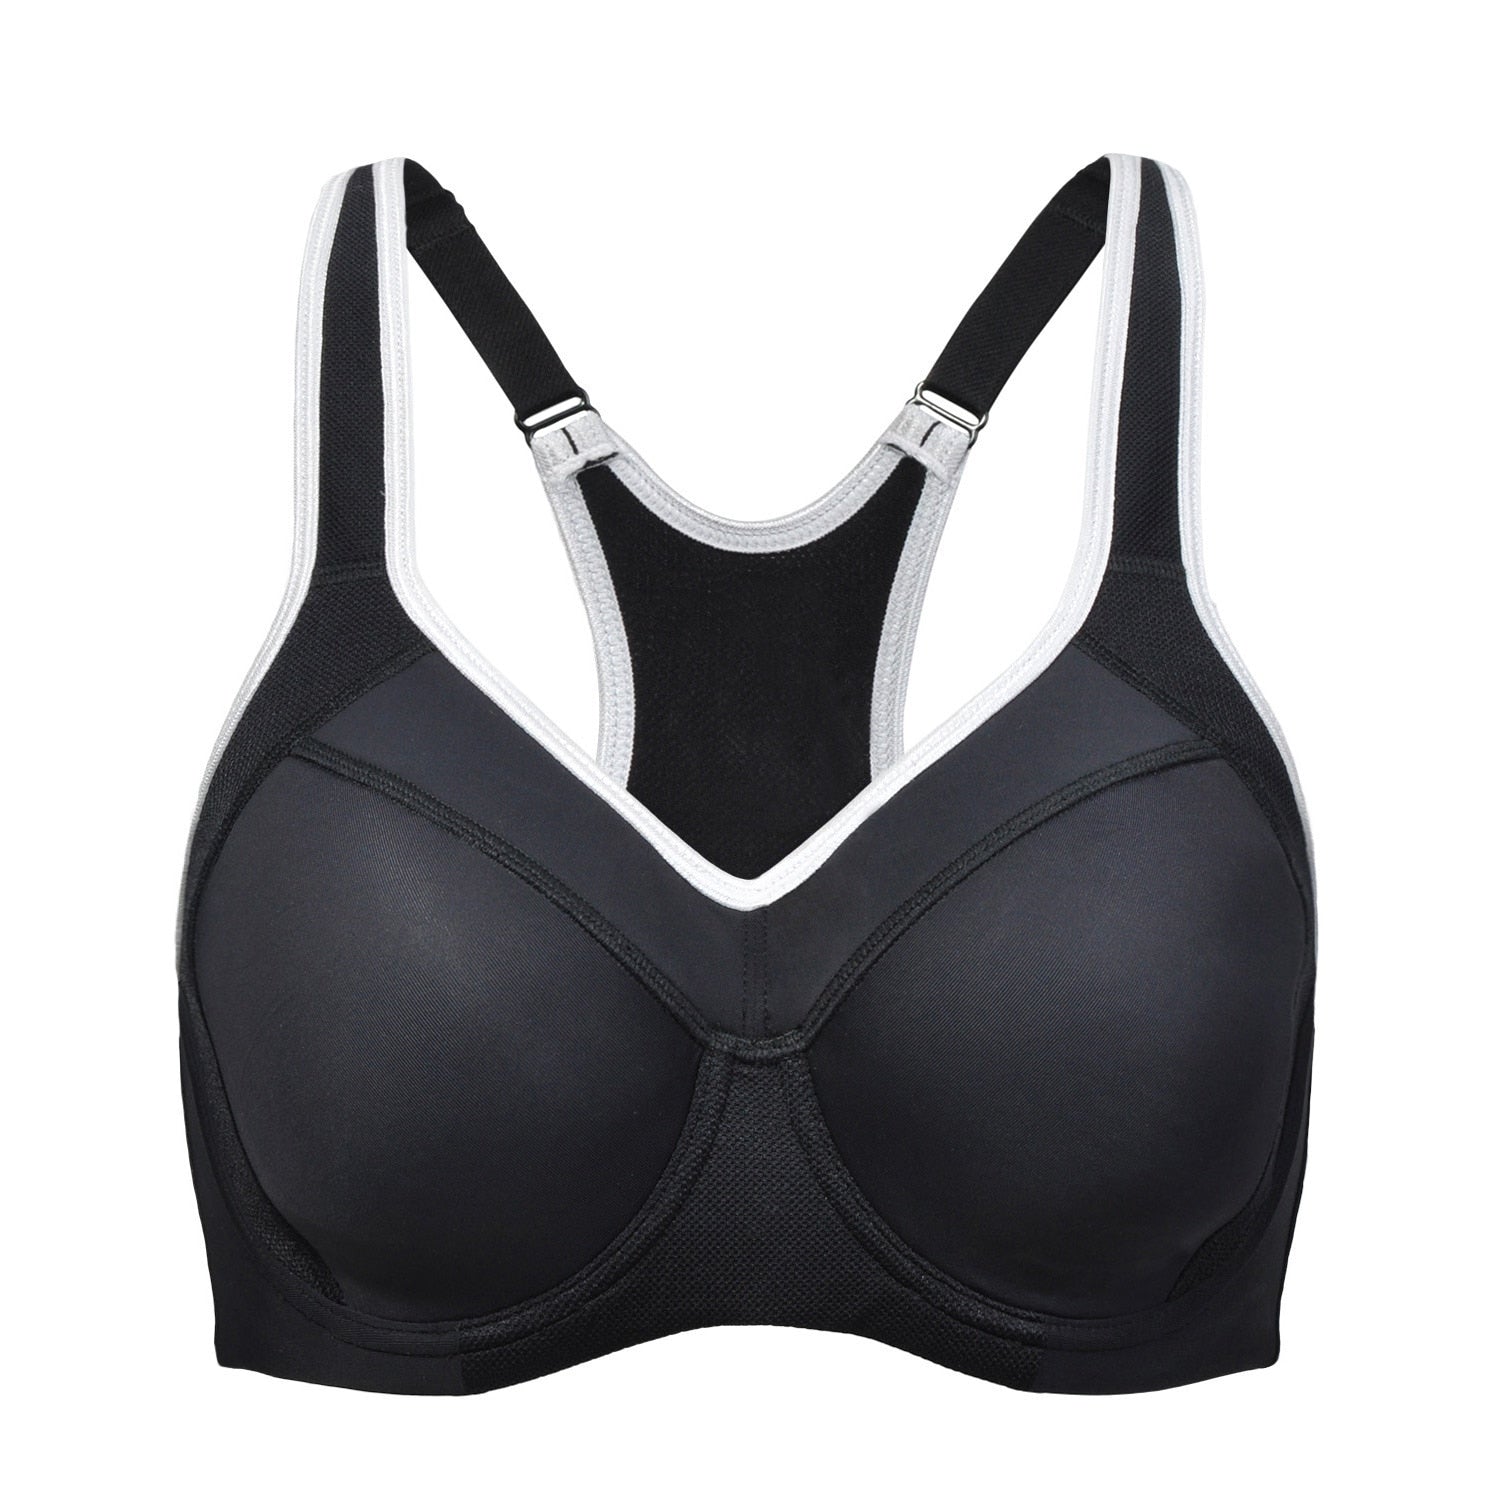 Plus Size High Impact Underwired Sports Bras (Size 34C - 42G